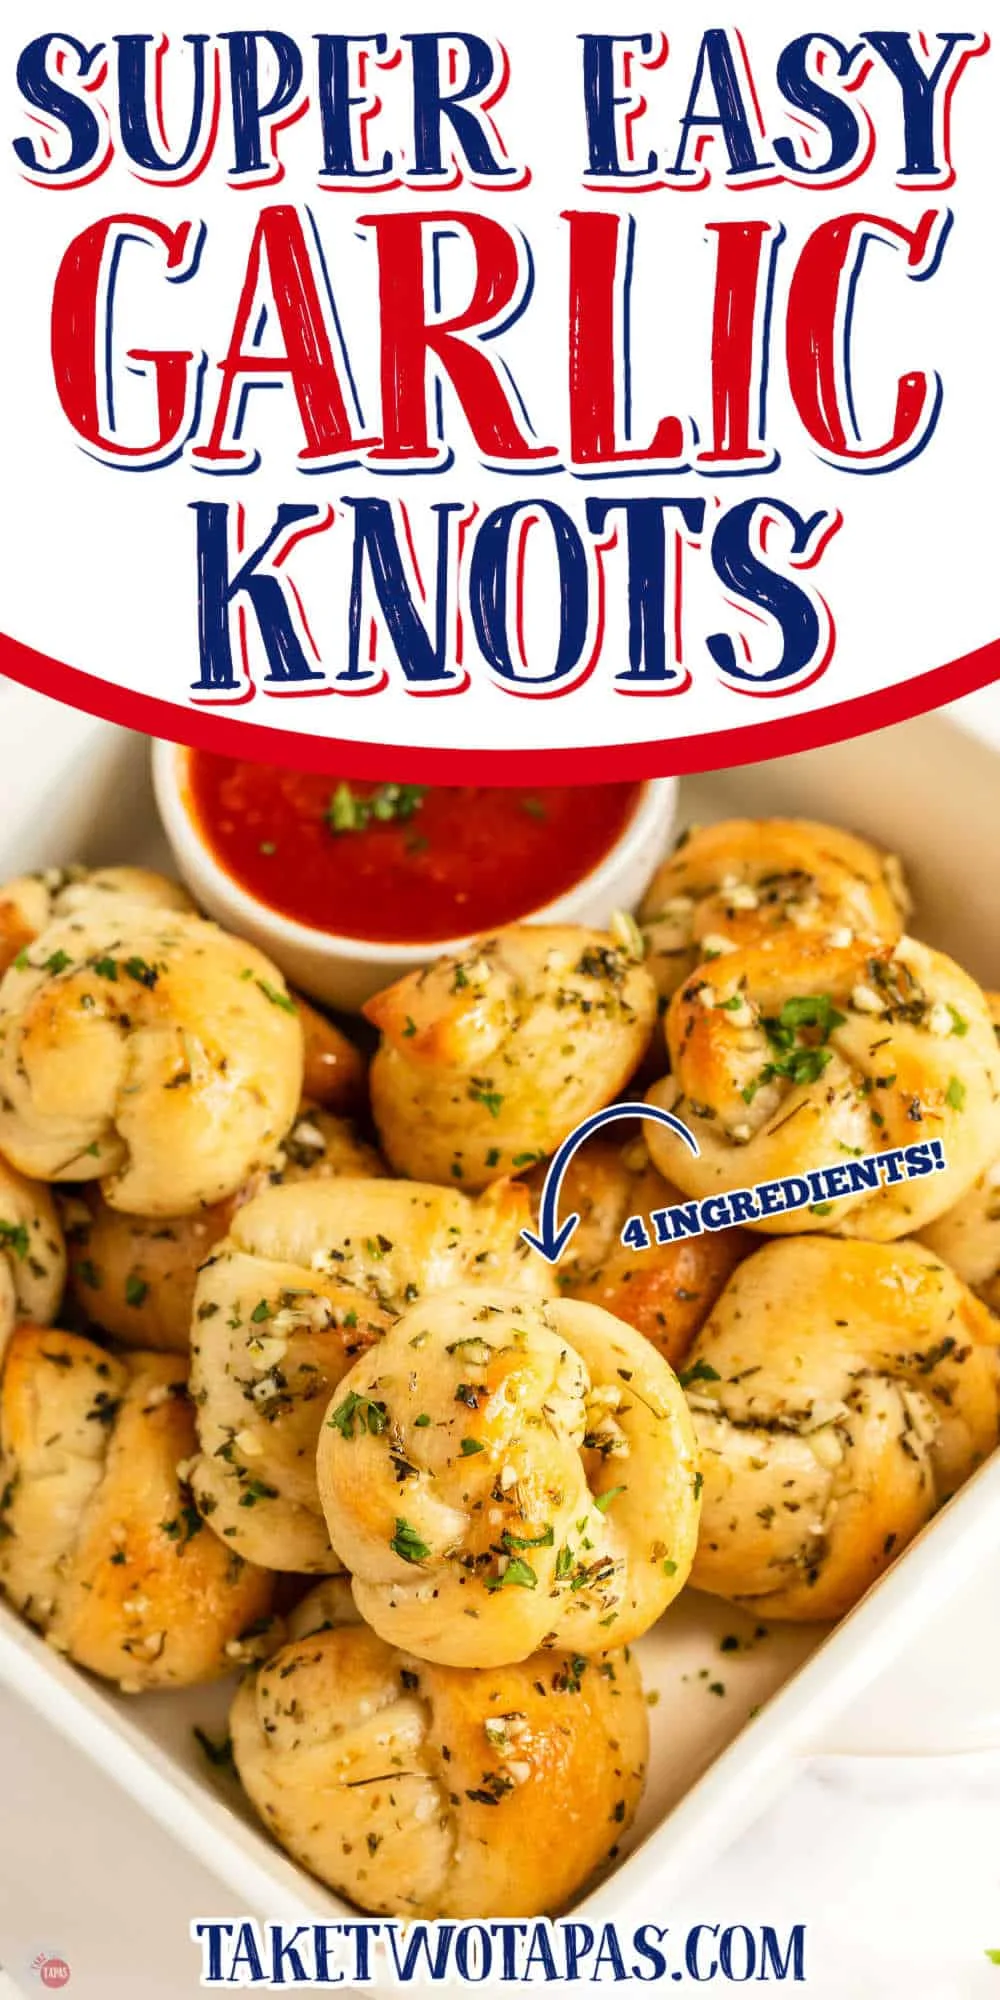 bowl of garlic knots with text "super easy"